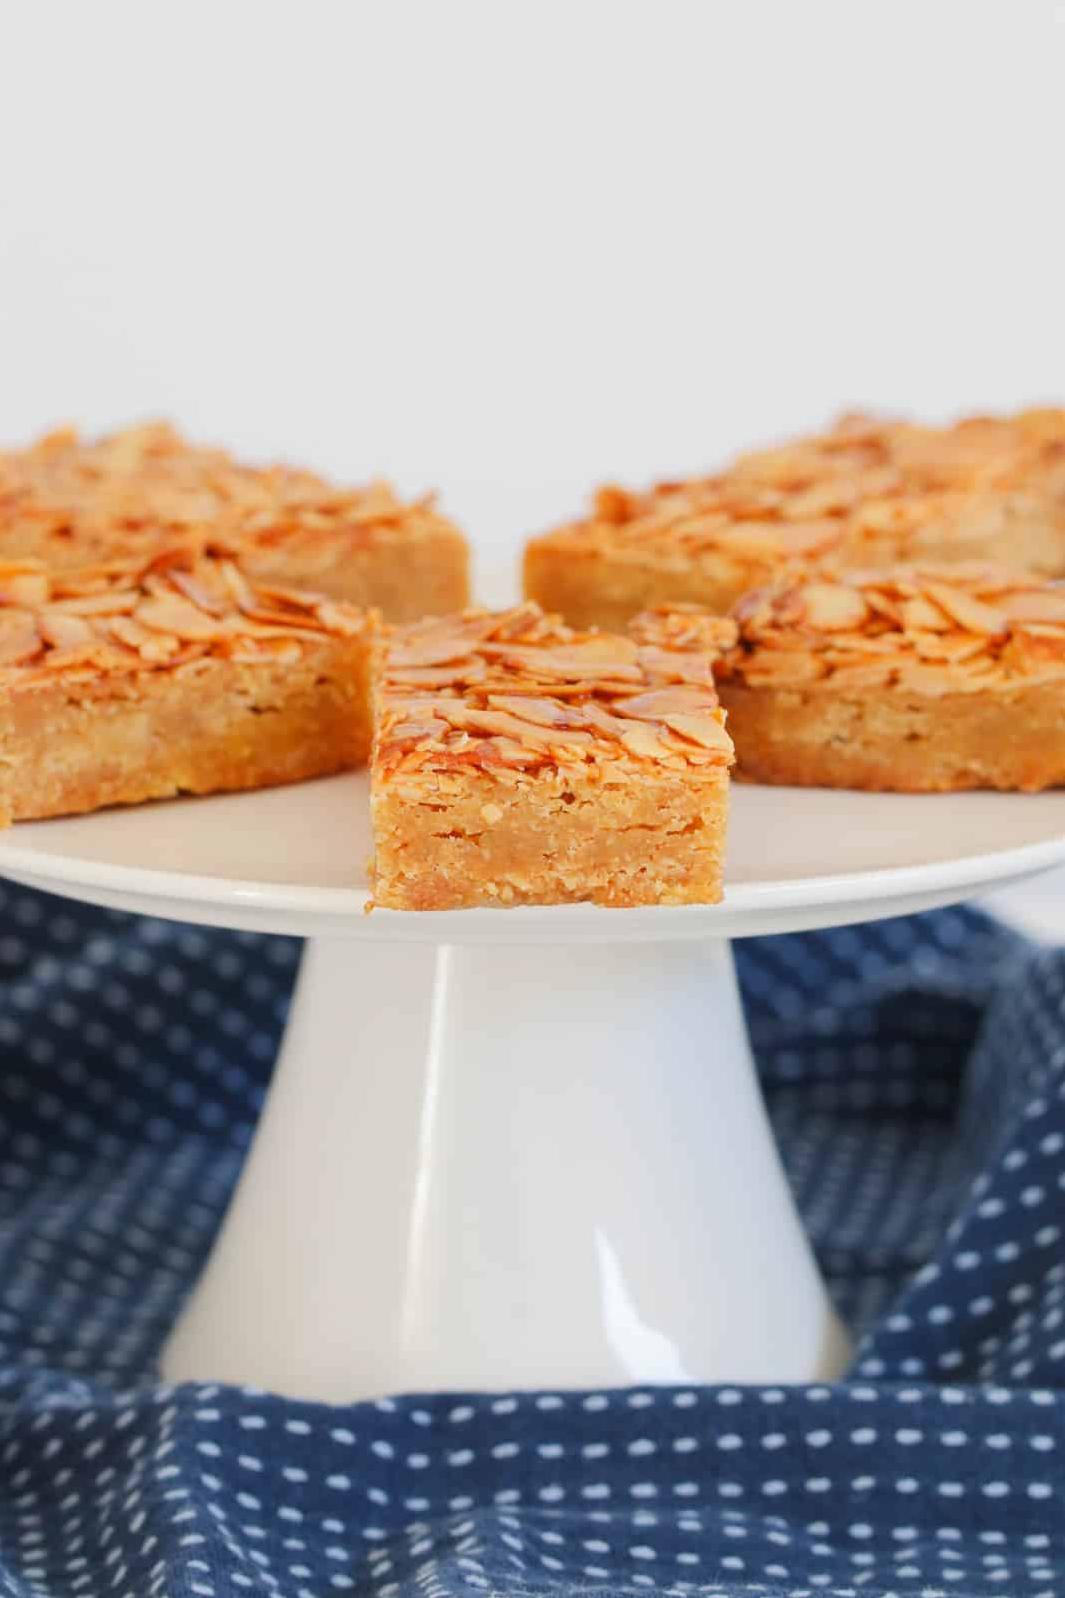  Indulge in a sweet snack that is both healthy and gluten-free with this recipe!